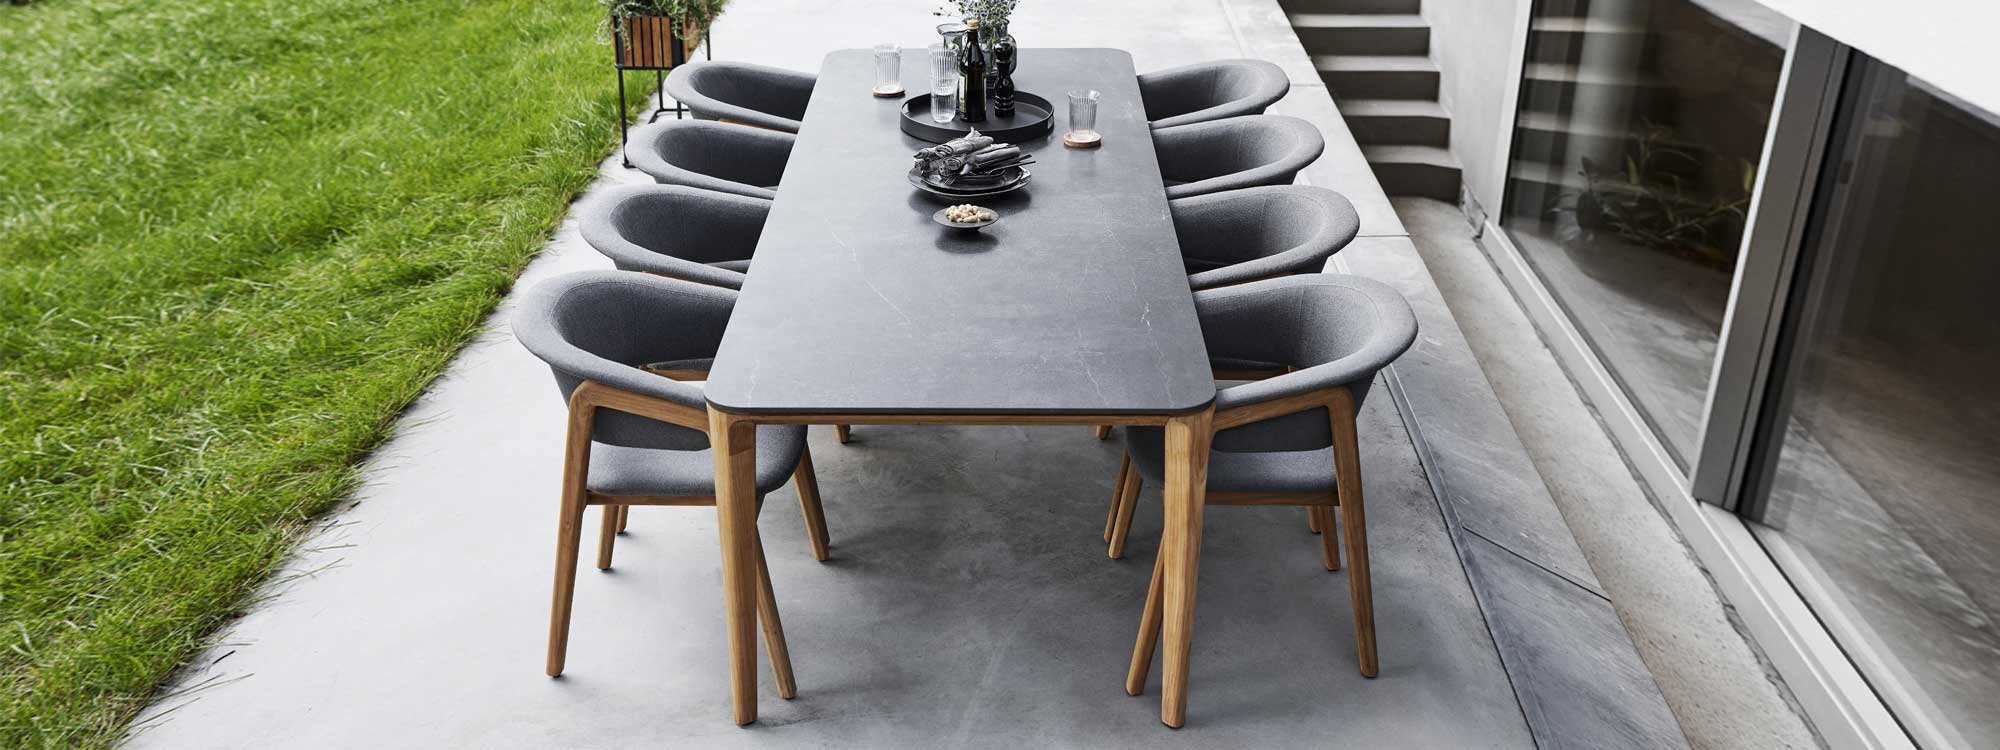 Image of Aspect teak dining table with black ceramic top and Luna teak garden chairs by Cane-line on poured concrete terrace